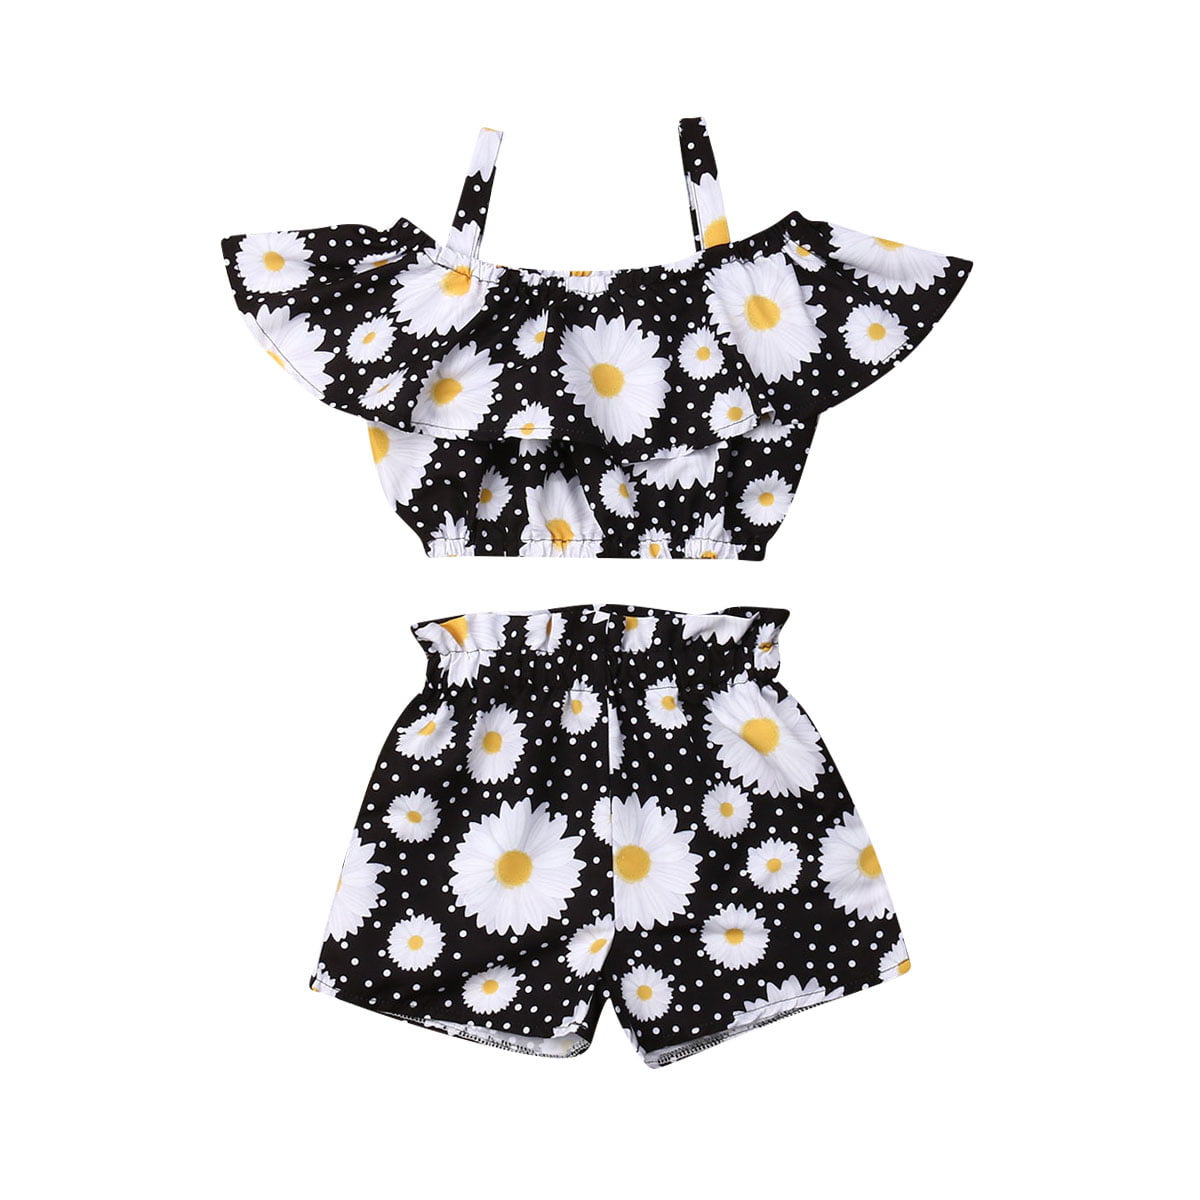 2pcs Kids Baby Girl Summer Clothes Floral Tank Crop Top Vest + Shorts Pants  Outfits Set Black 1-2 Years